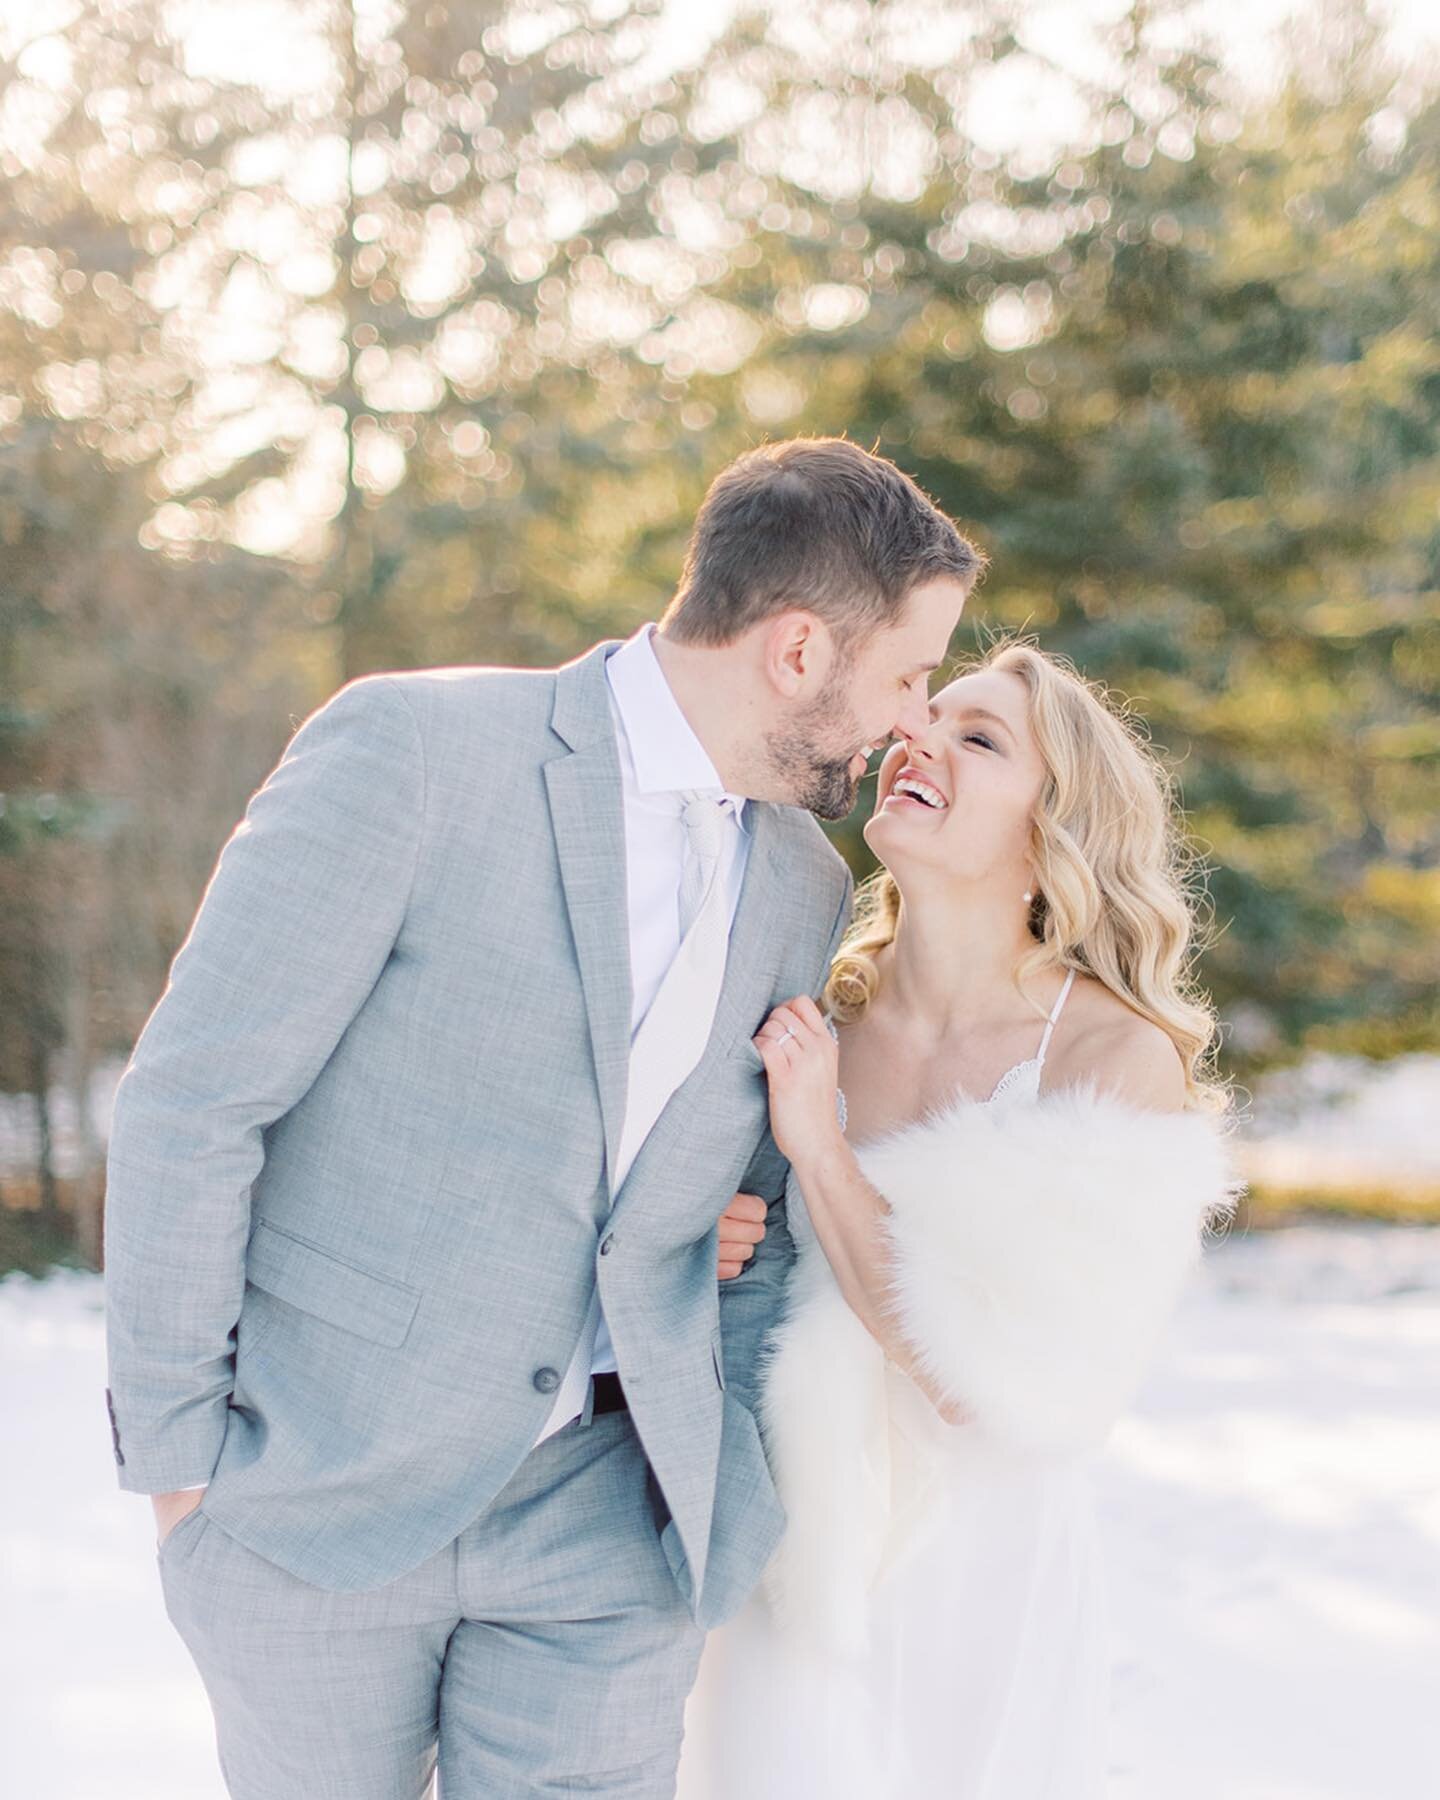 Dreaming of nicer winter days, like these two lovelies and their intimate elopement a couple years ago. 

I have space for a few more weddings this year - maybe more if they&rsquo;re intimate or on a weekday. I&rsquo;m only adding weddings when the t